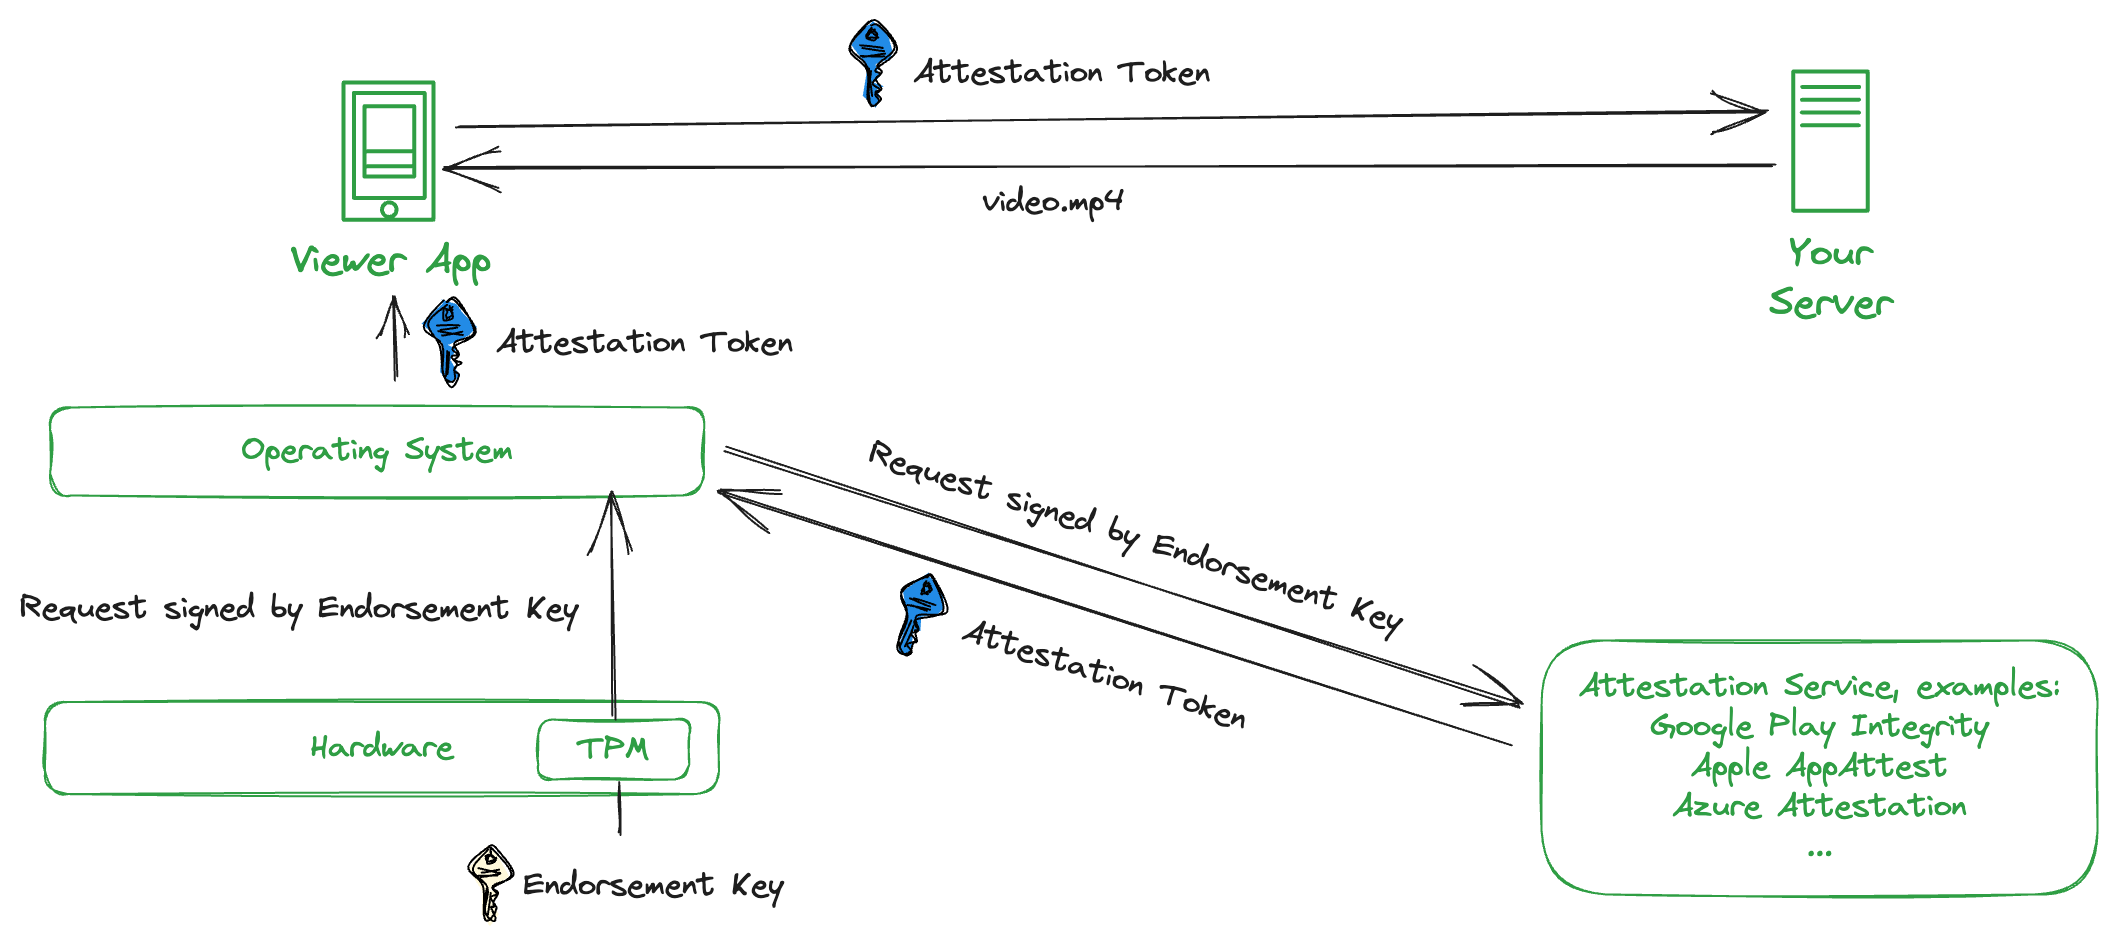 Visualization of the process for obtaining an Attestation Token.